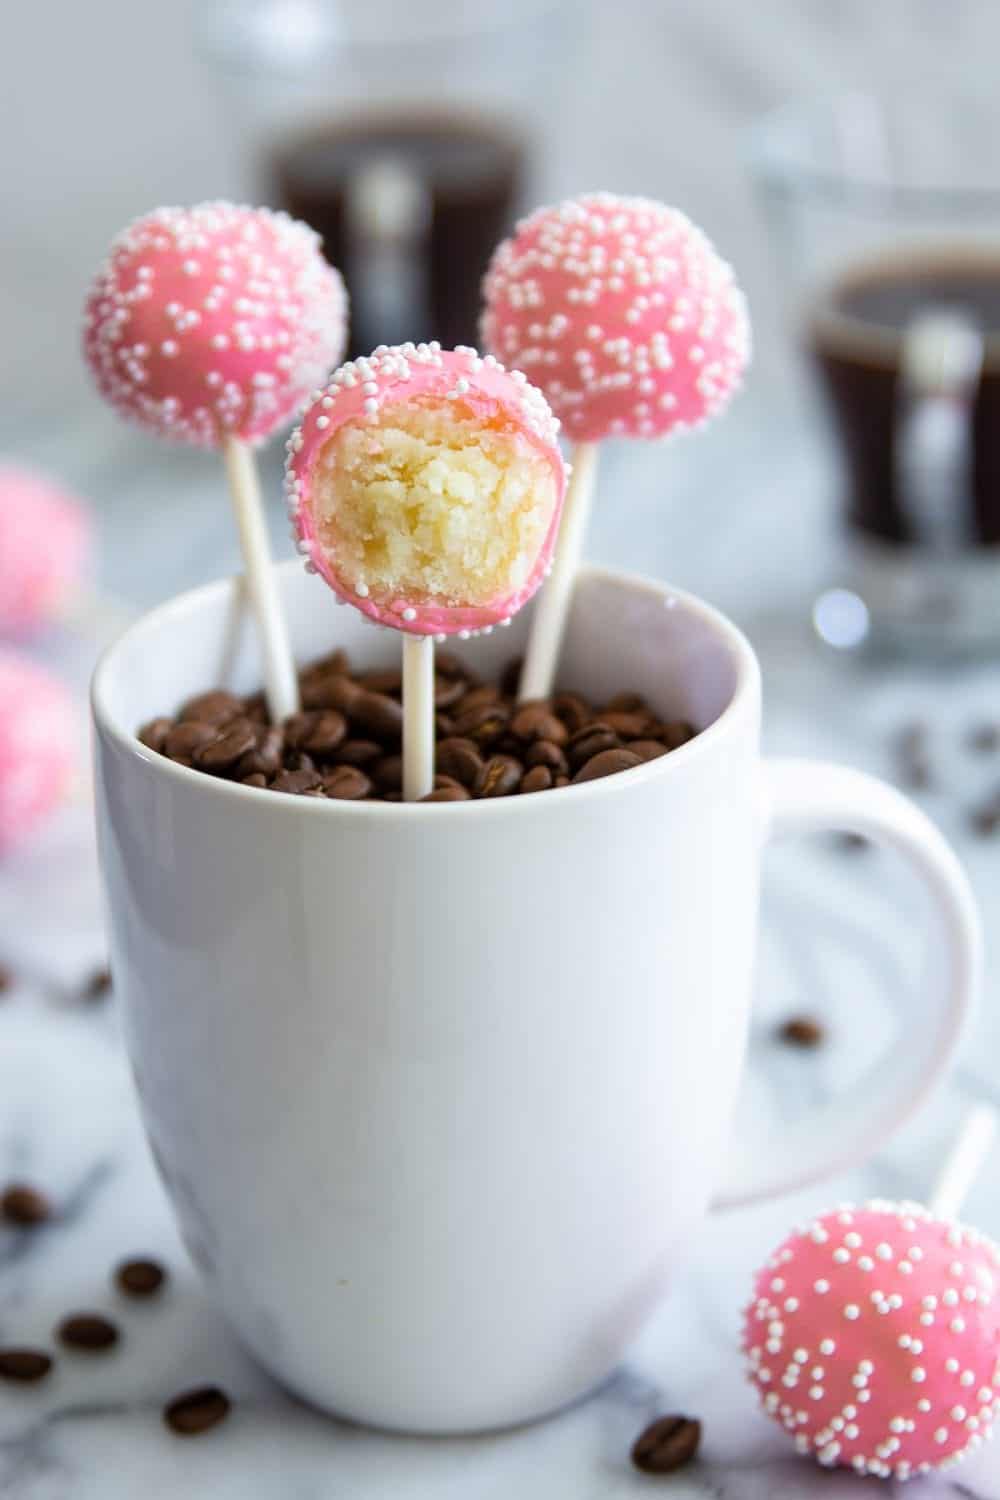 pink cake pops in a white mug filled with coffee beans